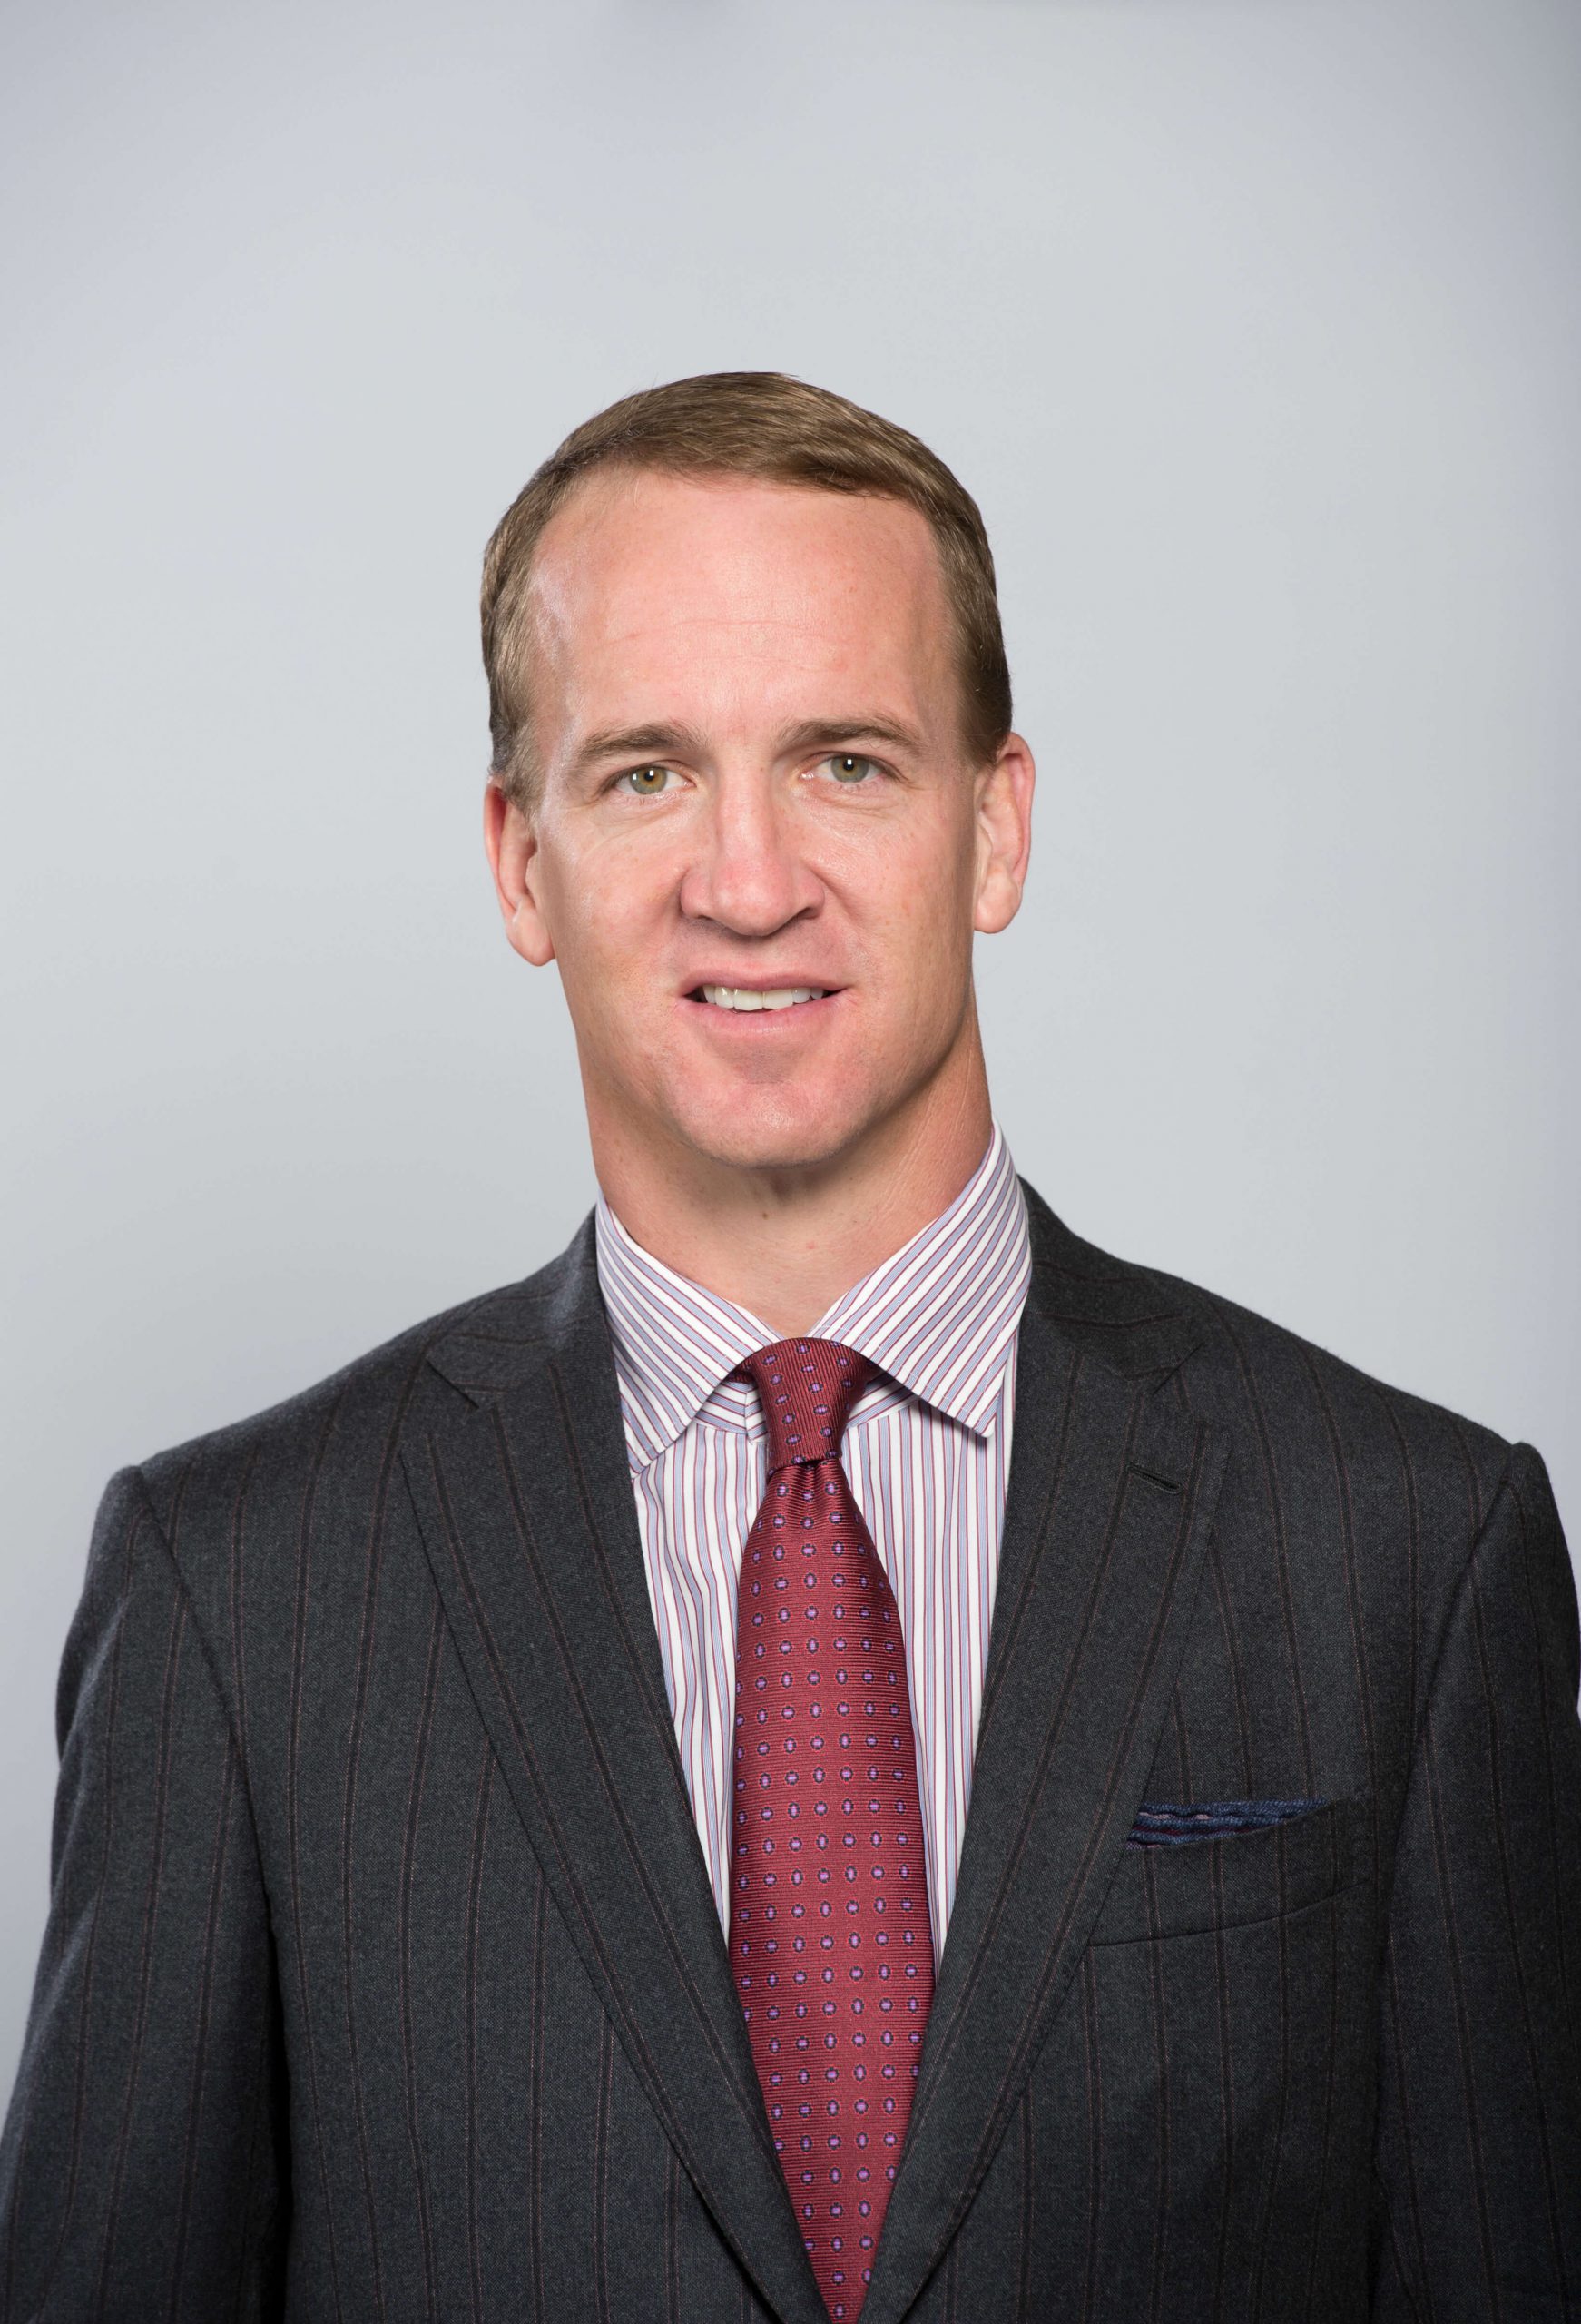 Hire Legend QB Peyton Manning for Your Event PDA Speakers photo